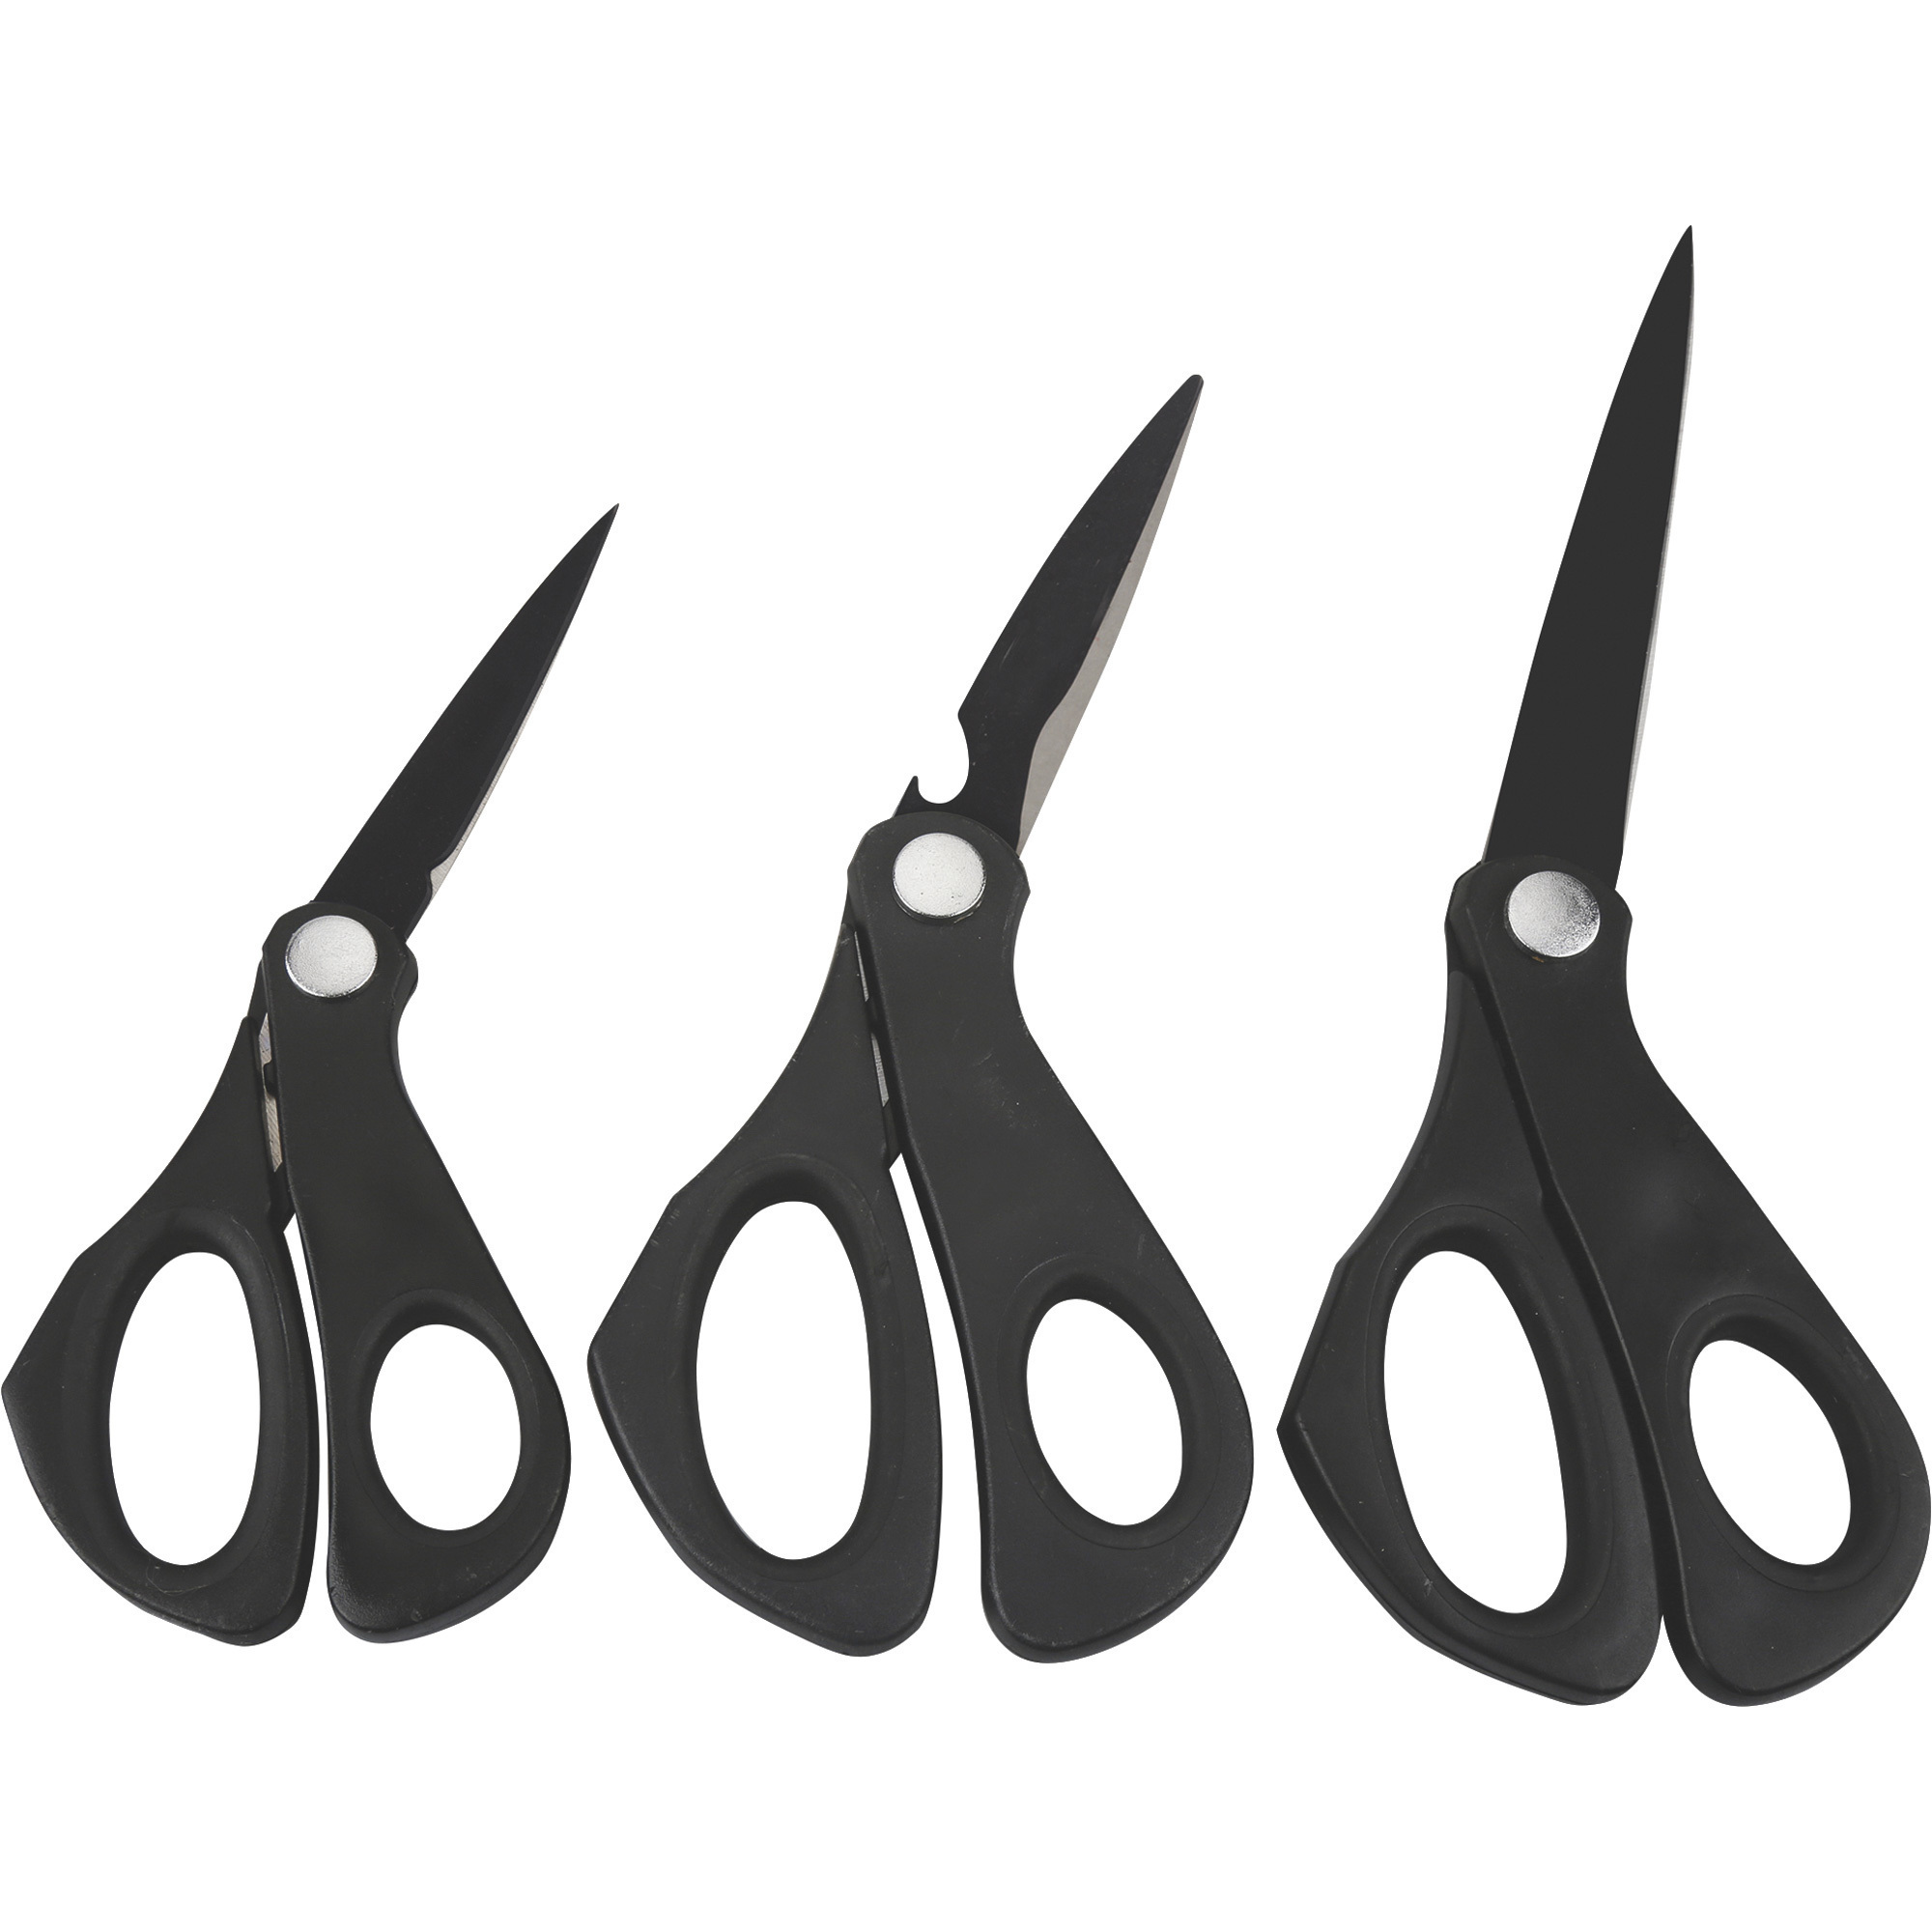  Olympia Tools 3 Pack Heavy Duty Straight Scissors All Purpose  Premium Stainless Steel Shears - 8,10,12 - Great for Office Home Arts  Crafts Fabric Sewing Leather and Dressmaking - Black 